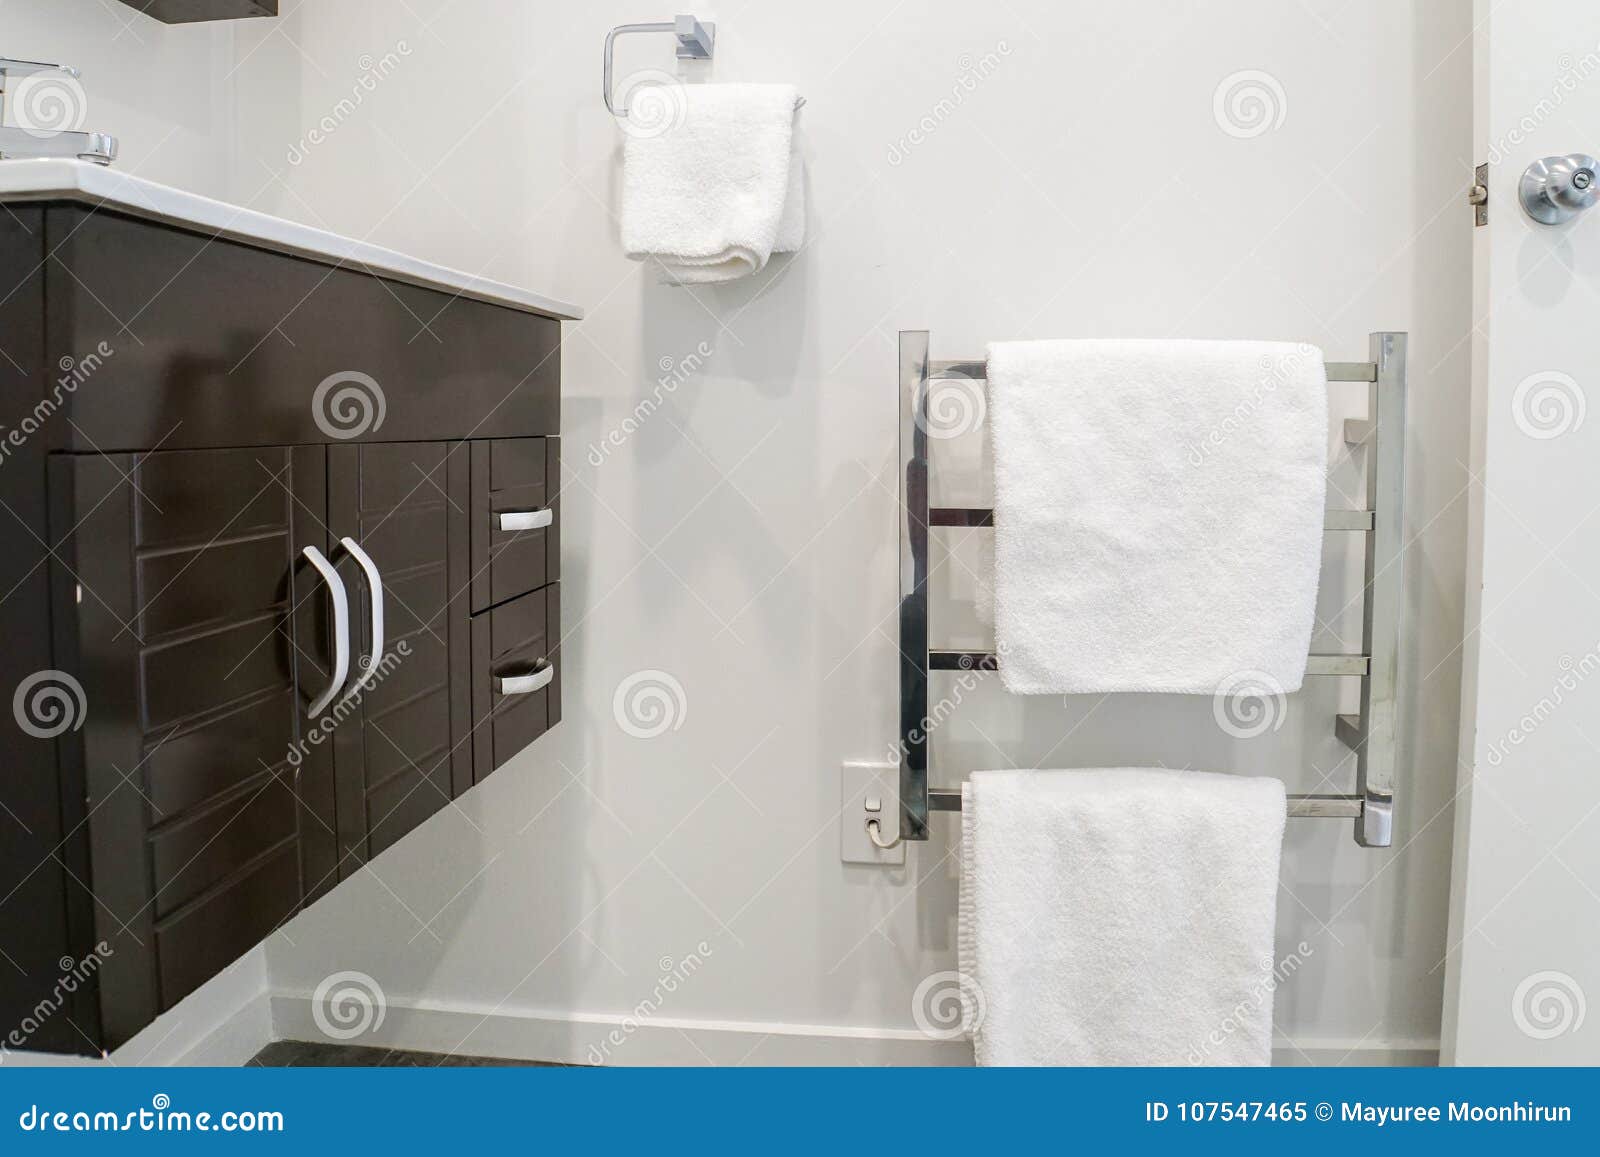 Cabinet At Basin And White Towel On Metal Rails For Taking A Bath